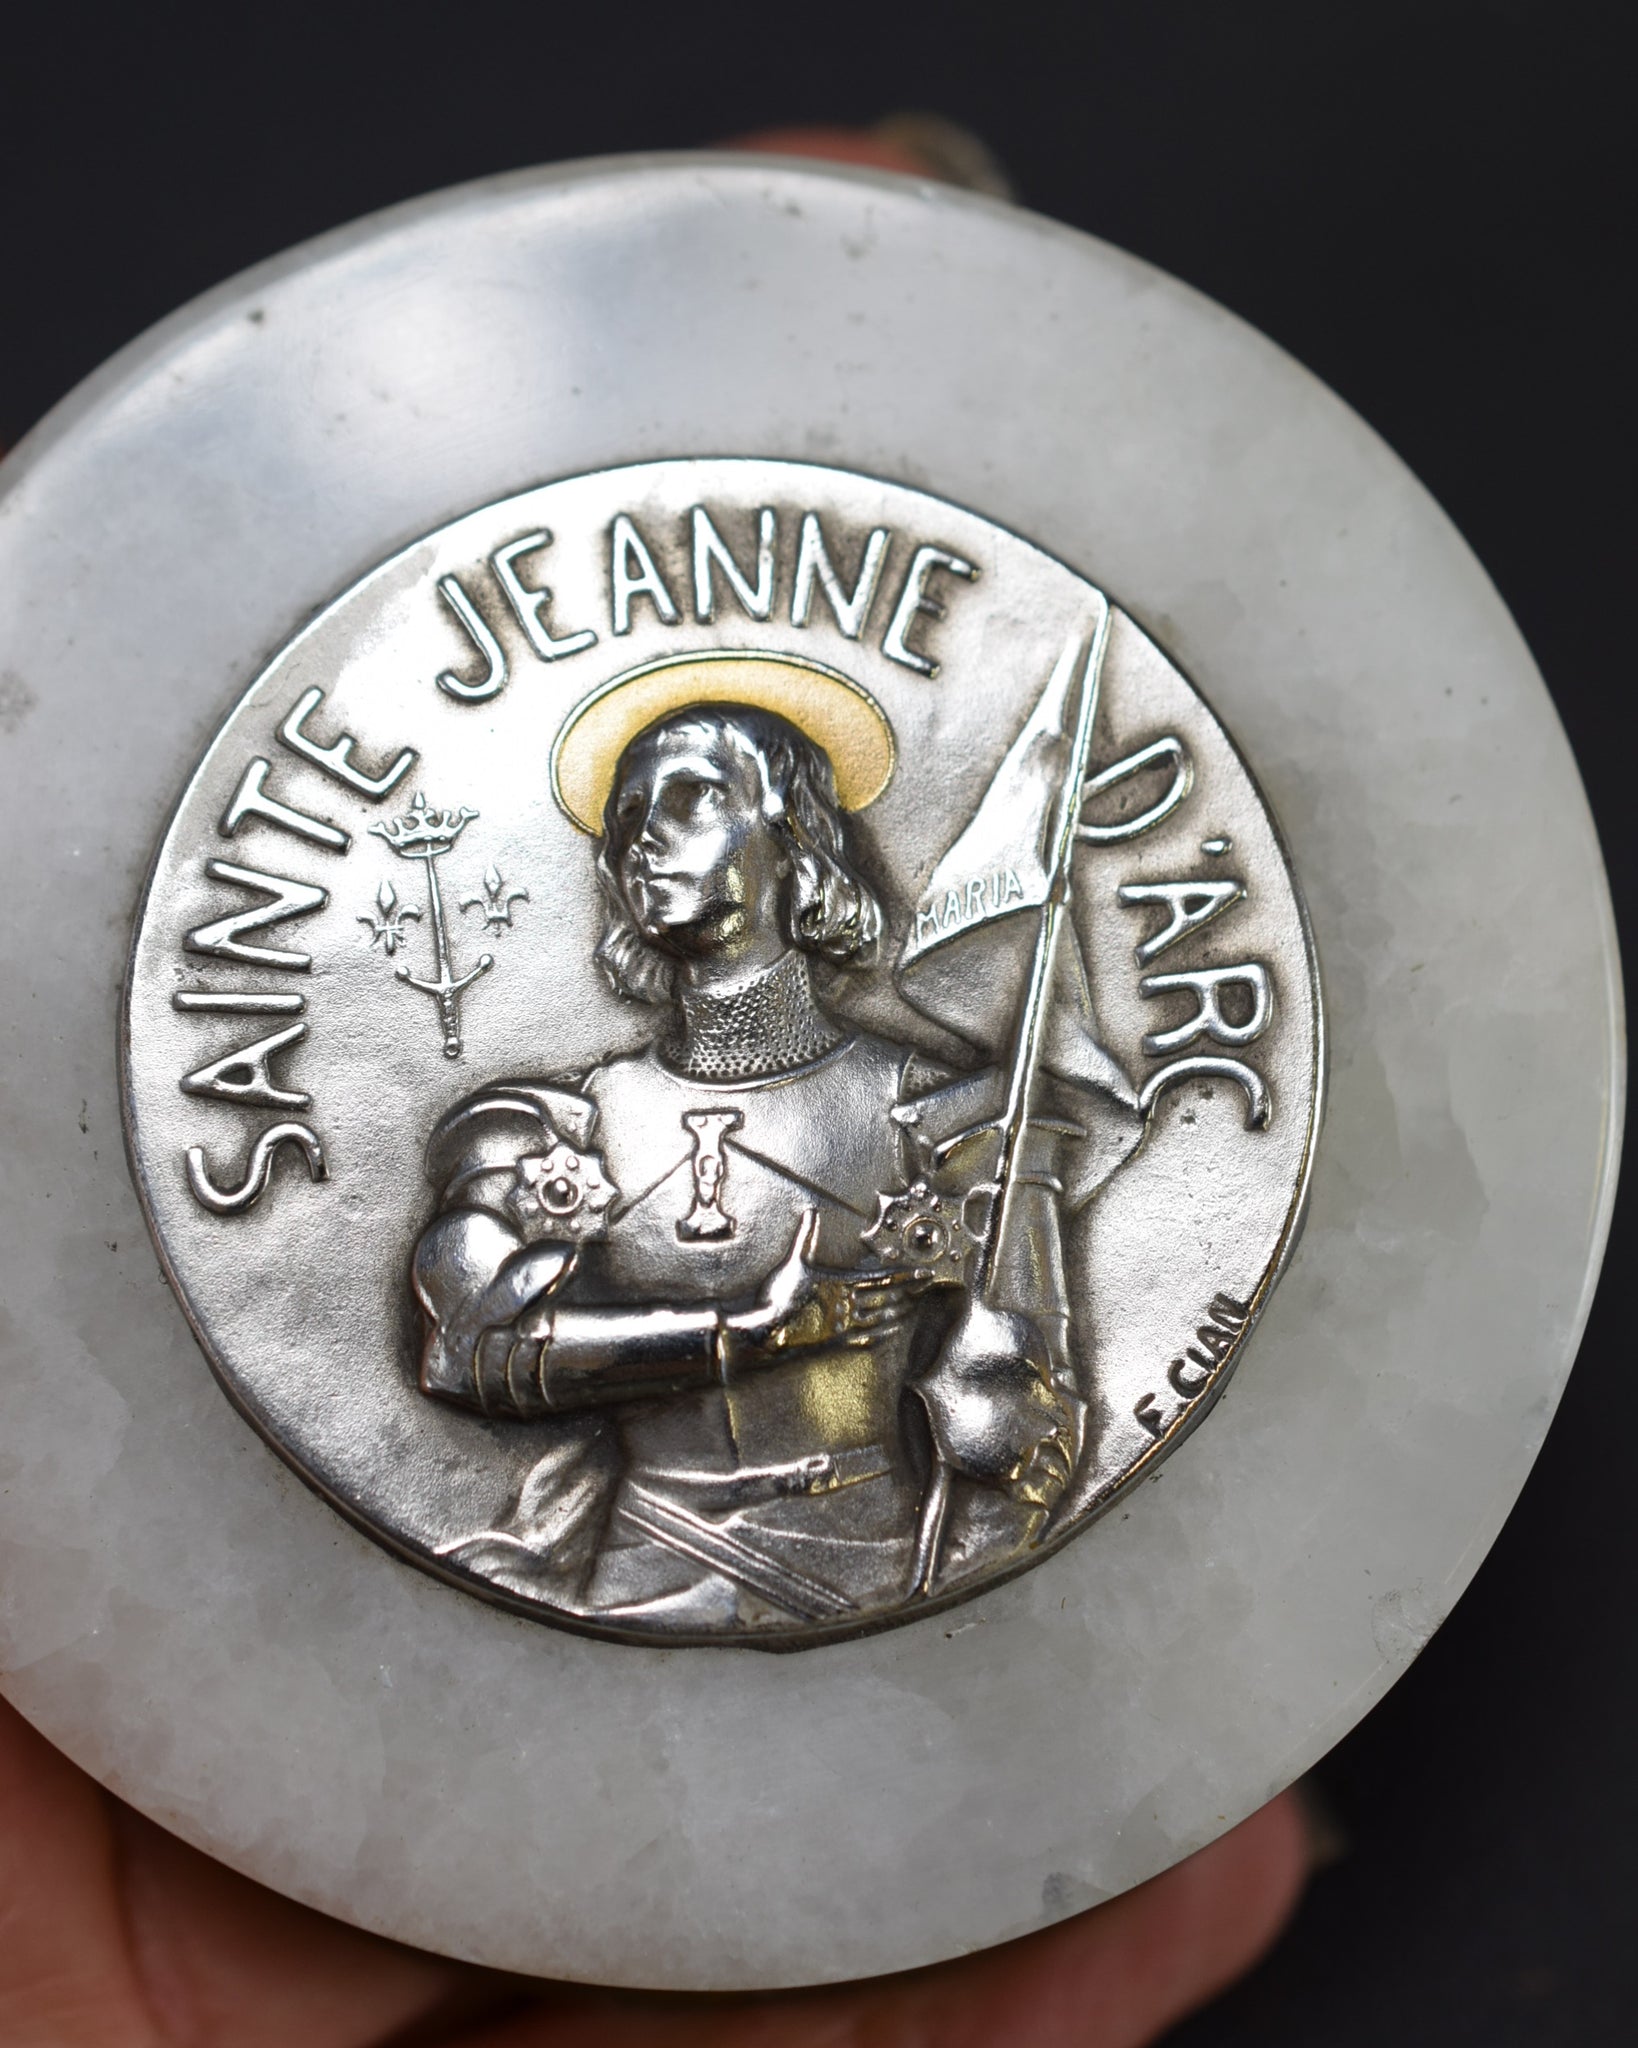 Vintage Saint Joan of Arc Paperweight by F Cian Marble